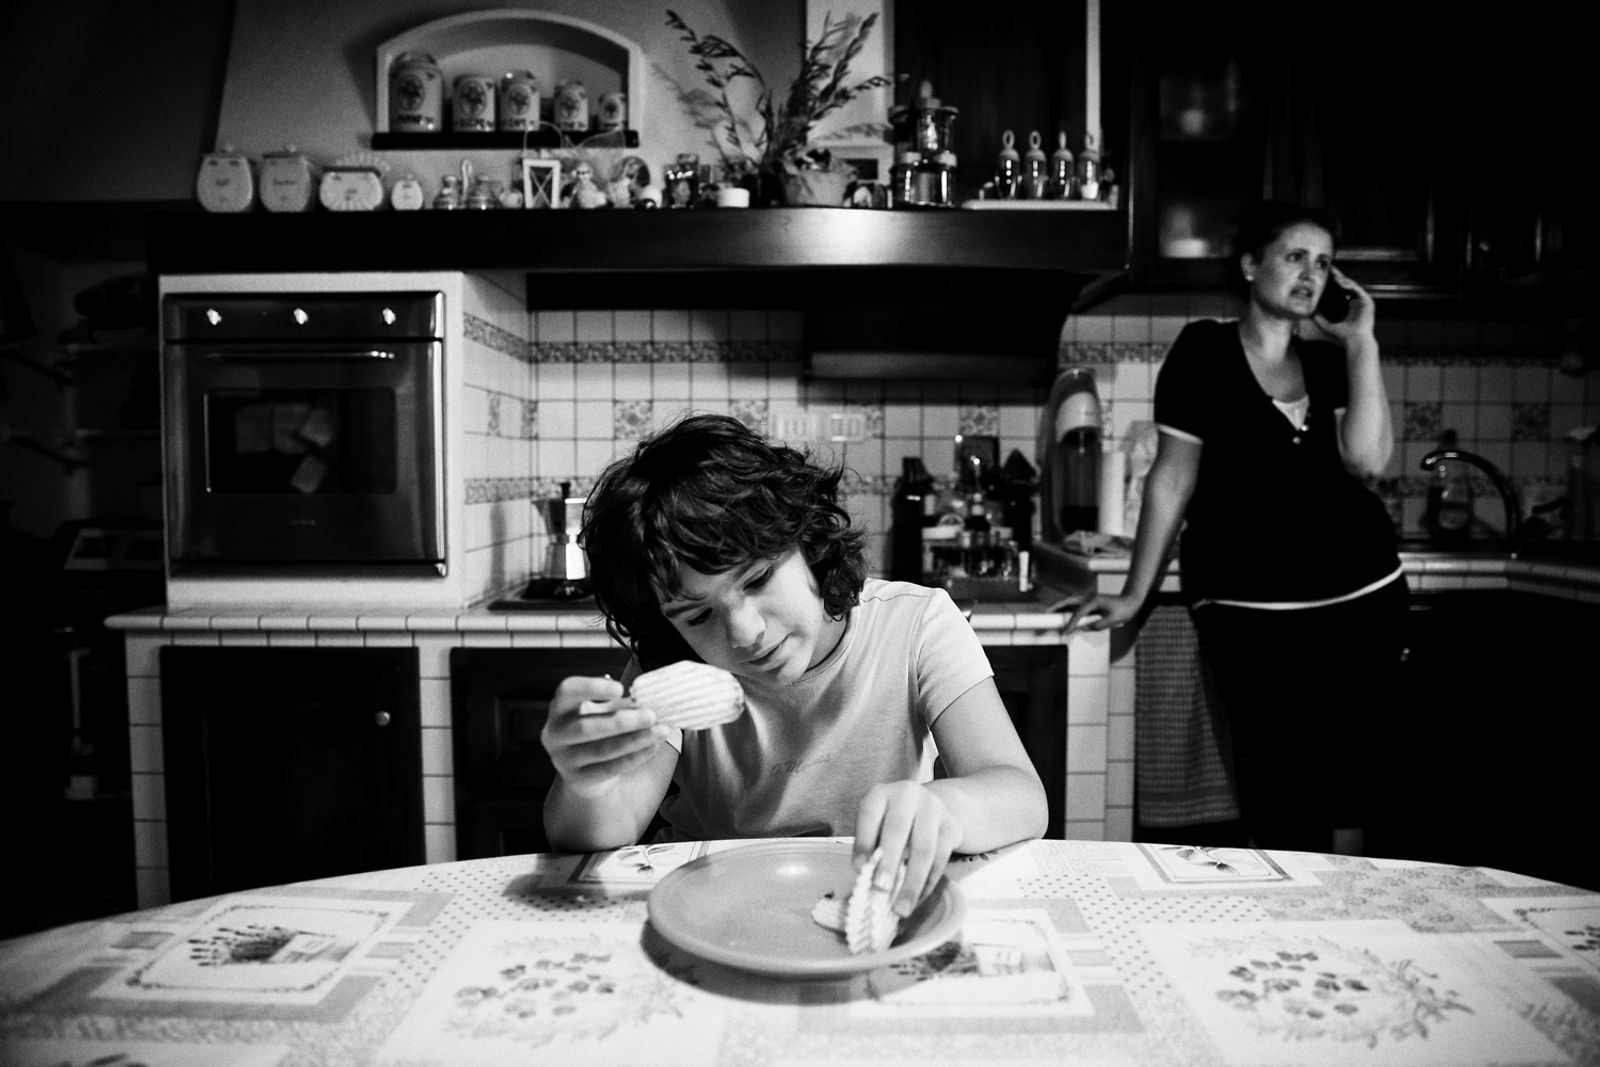 © BARBARA ZANON - Magione, Perugia, Italy - August 2016. Luisa has a snack at home in the kitchen, while being watched over by the babysitter